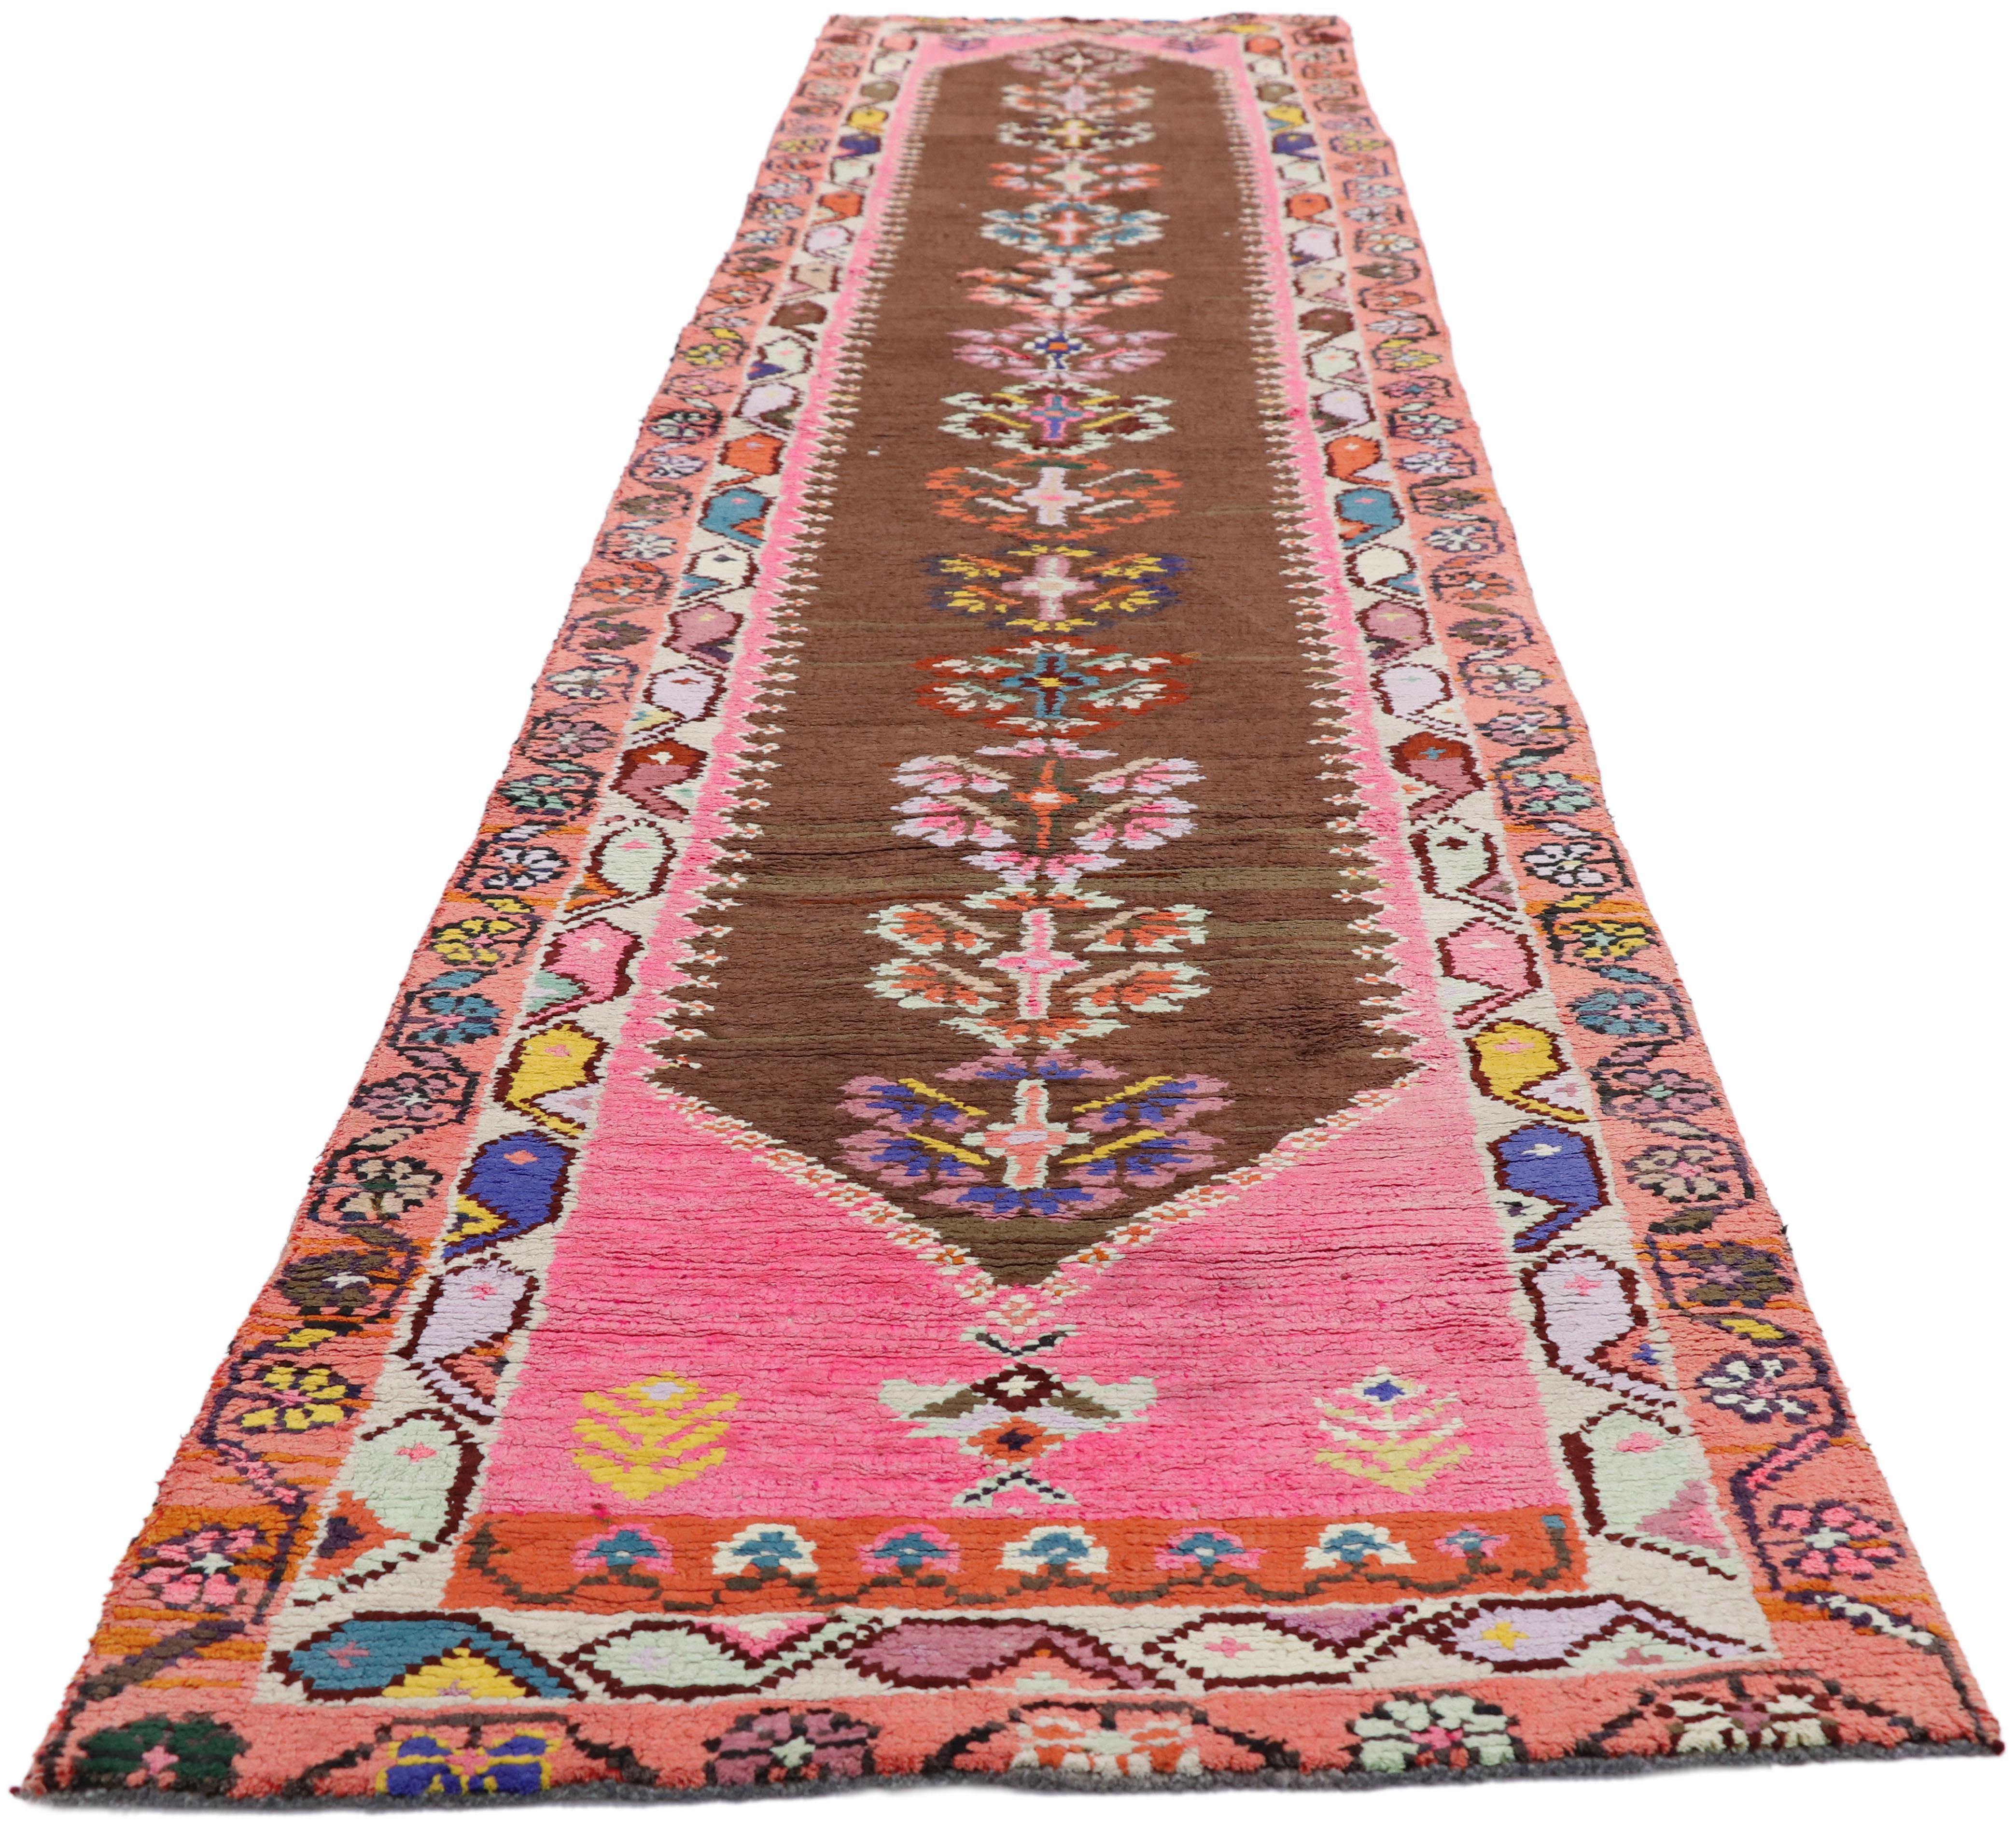 Turc Vintage Turkish Oushak Runner with Eclectic Modern Mexican Frida Kahlo Style en vente